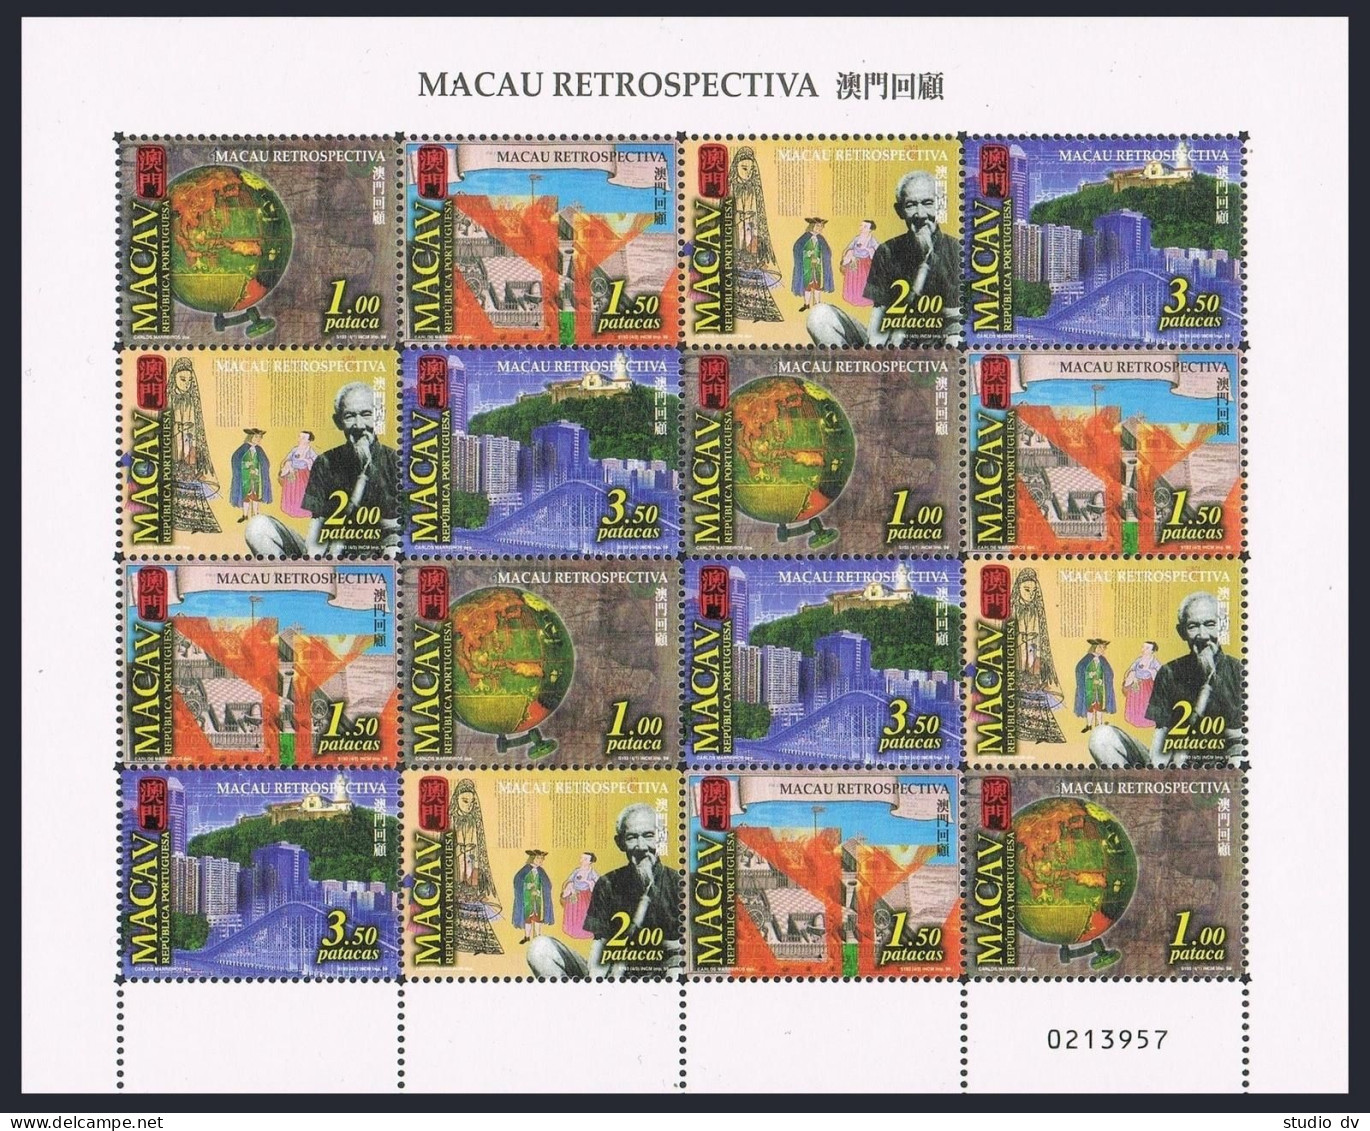 Macao 1010 Sheet,1011,1011a,MNH. Macao-Portuguese History,1999.Globe,Fort,Bridge - Unused Stamps